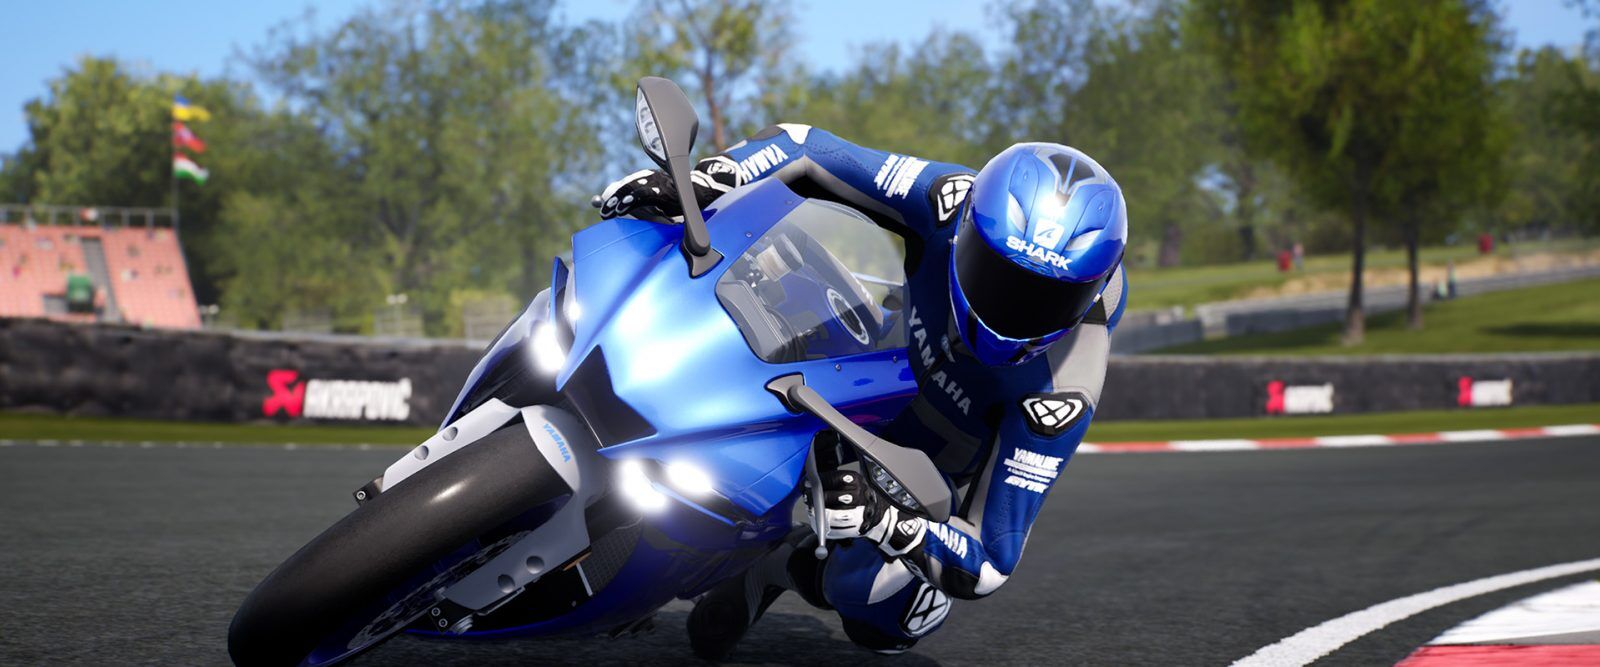 These are the best motorcycle racing games